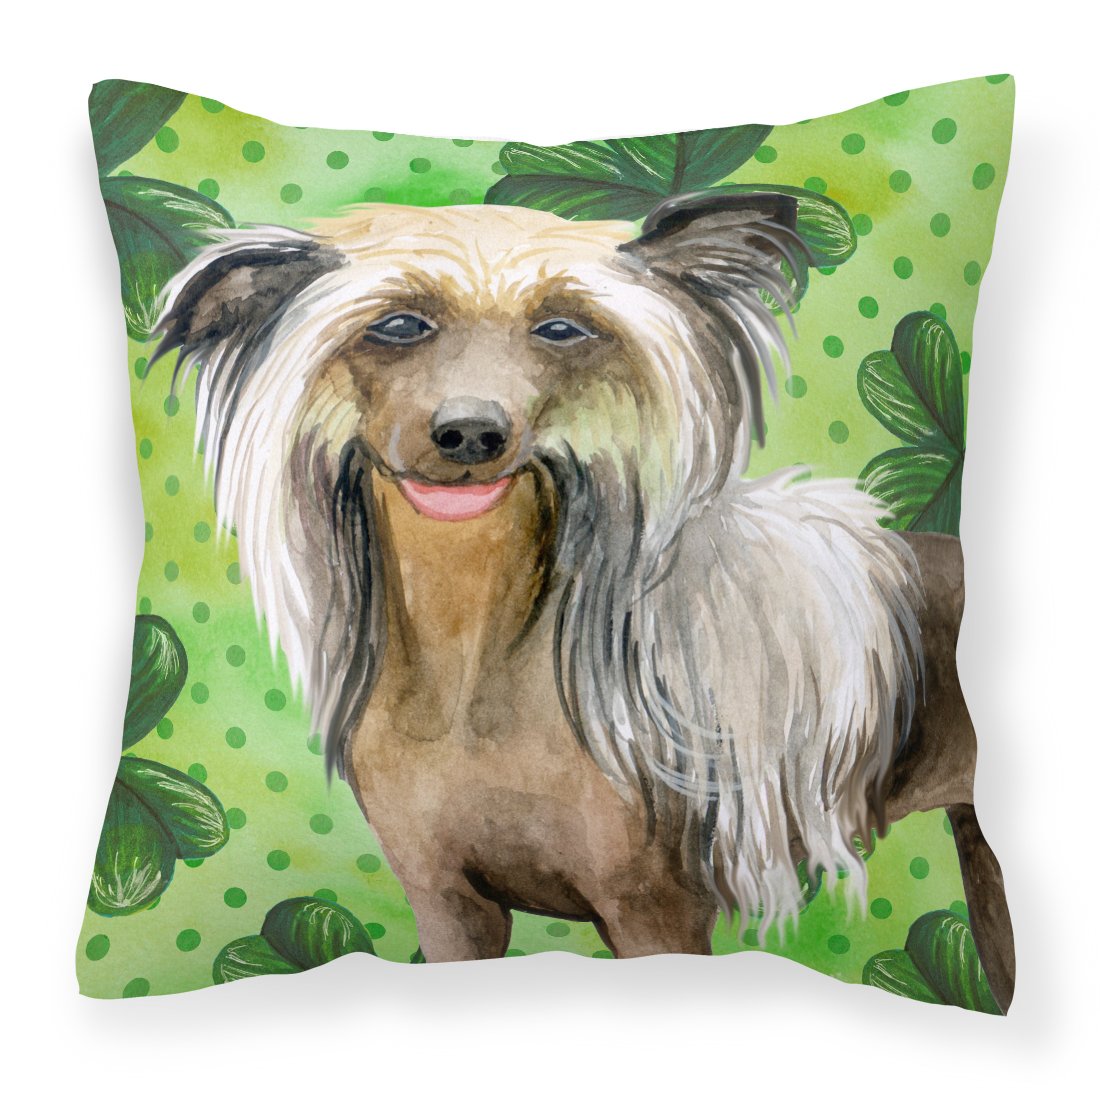 Chinese Crested St Patrick's Fabric Decorative Pillow BB9833PW1818 by Caroline's Treasures